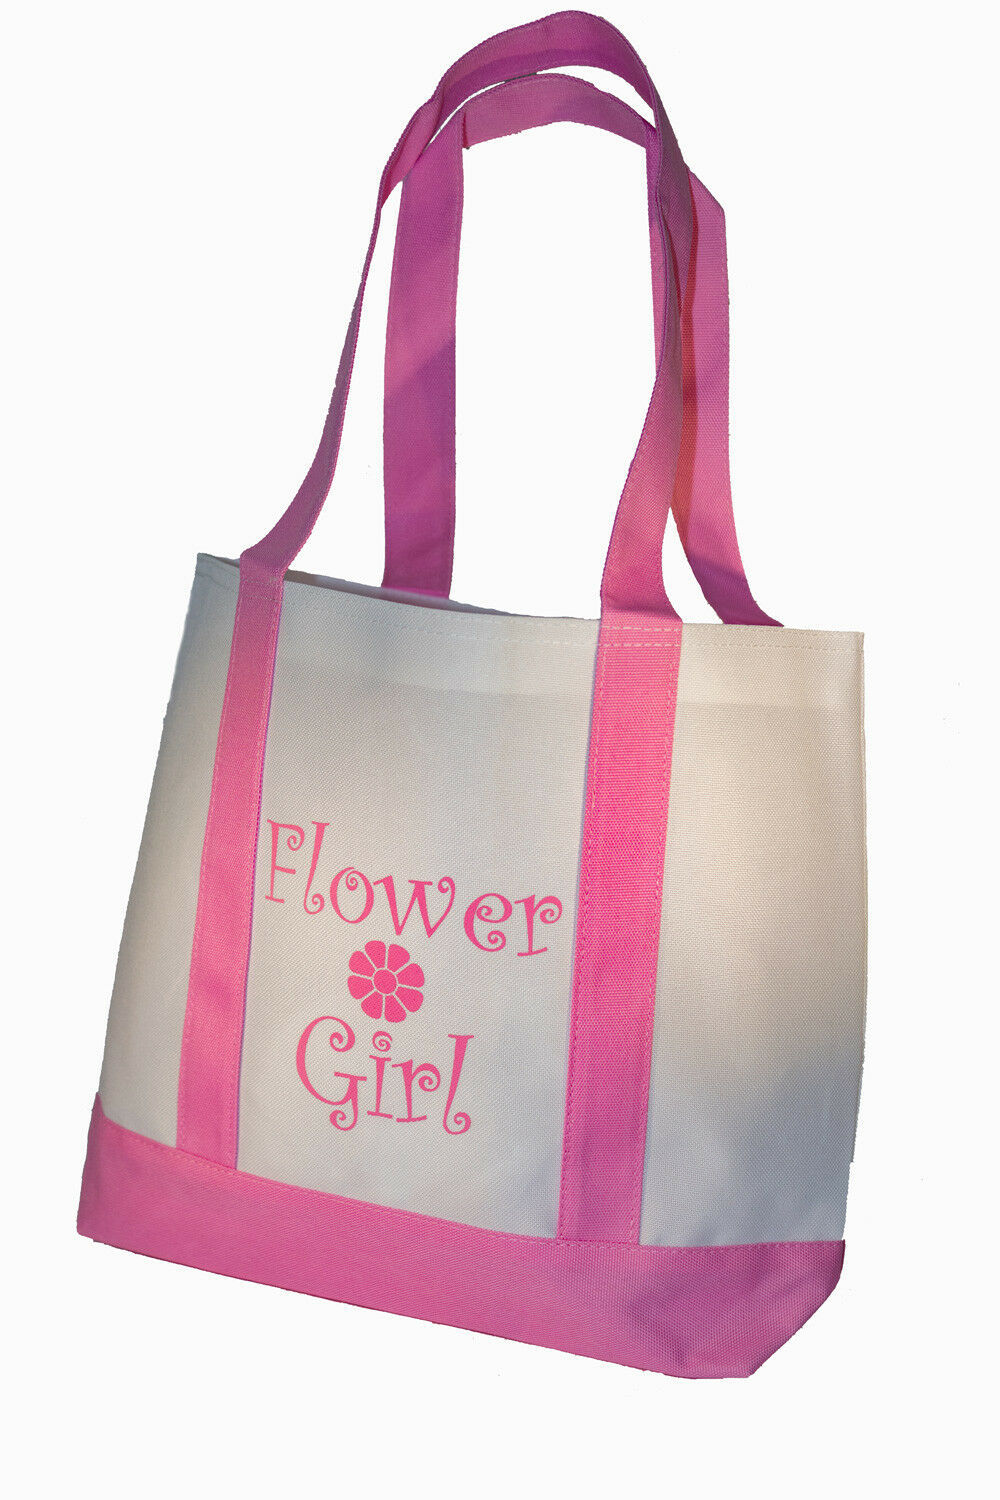 Flower Girl Tote Bag Gift White with Pink Straps Large Wedding Flower Girl Gifts